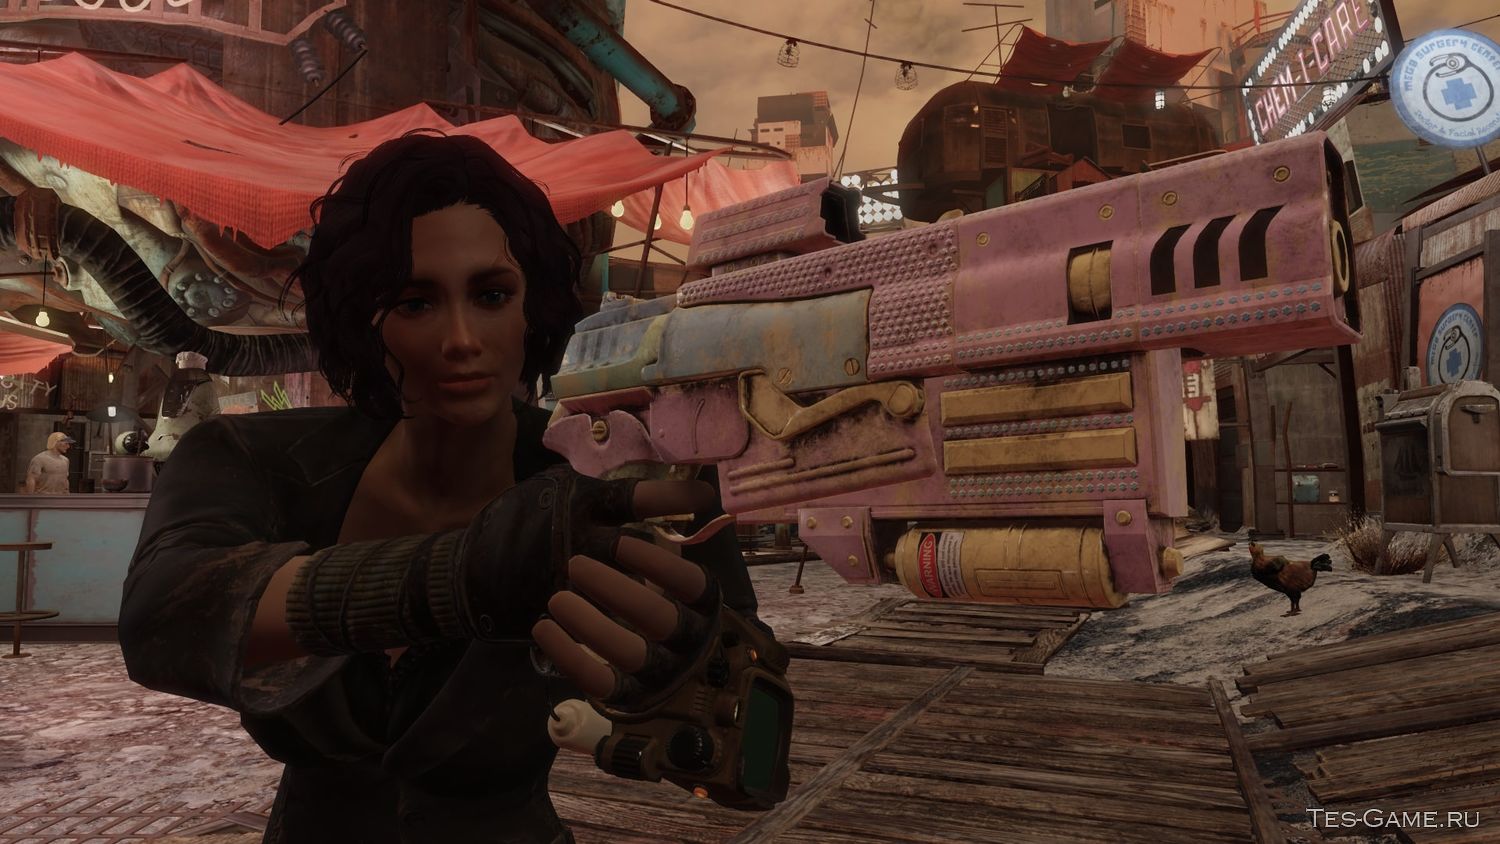 10mm pistol reanimation pack fallout 4 фото 67